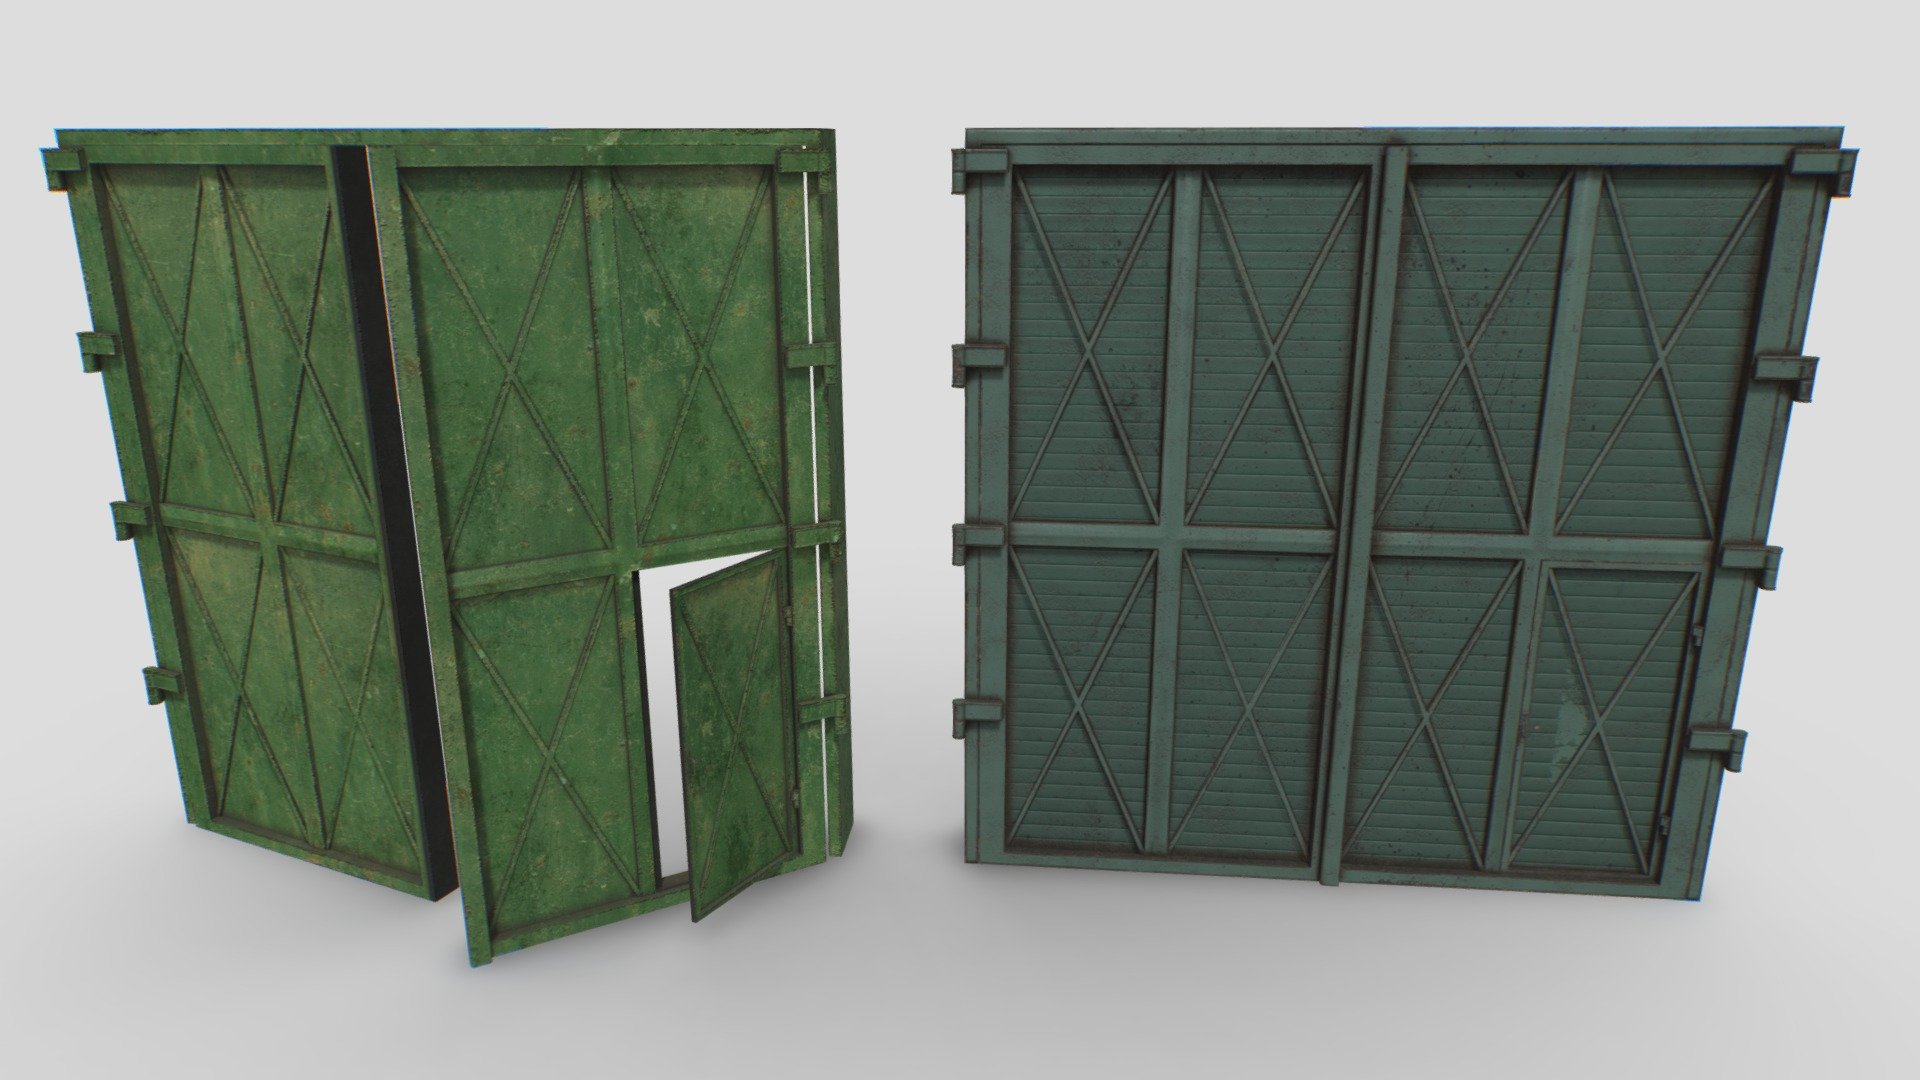 2 Realistic metal gates based in real one. Realistic scale.

Comes with 2 PBR 4096pix texture sets including Albedo, Normal, Roughness, Metalness, AO.

Suitable for factories, hangars, warehouses, etc..

Gates can be opened as showed in the pics 3d model